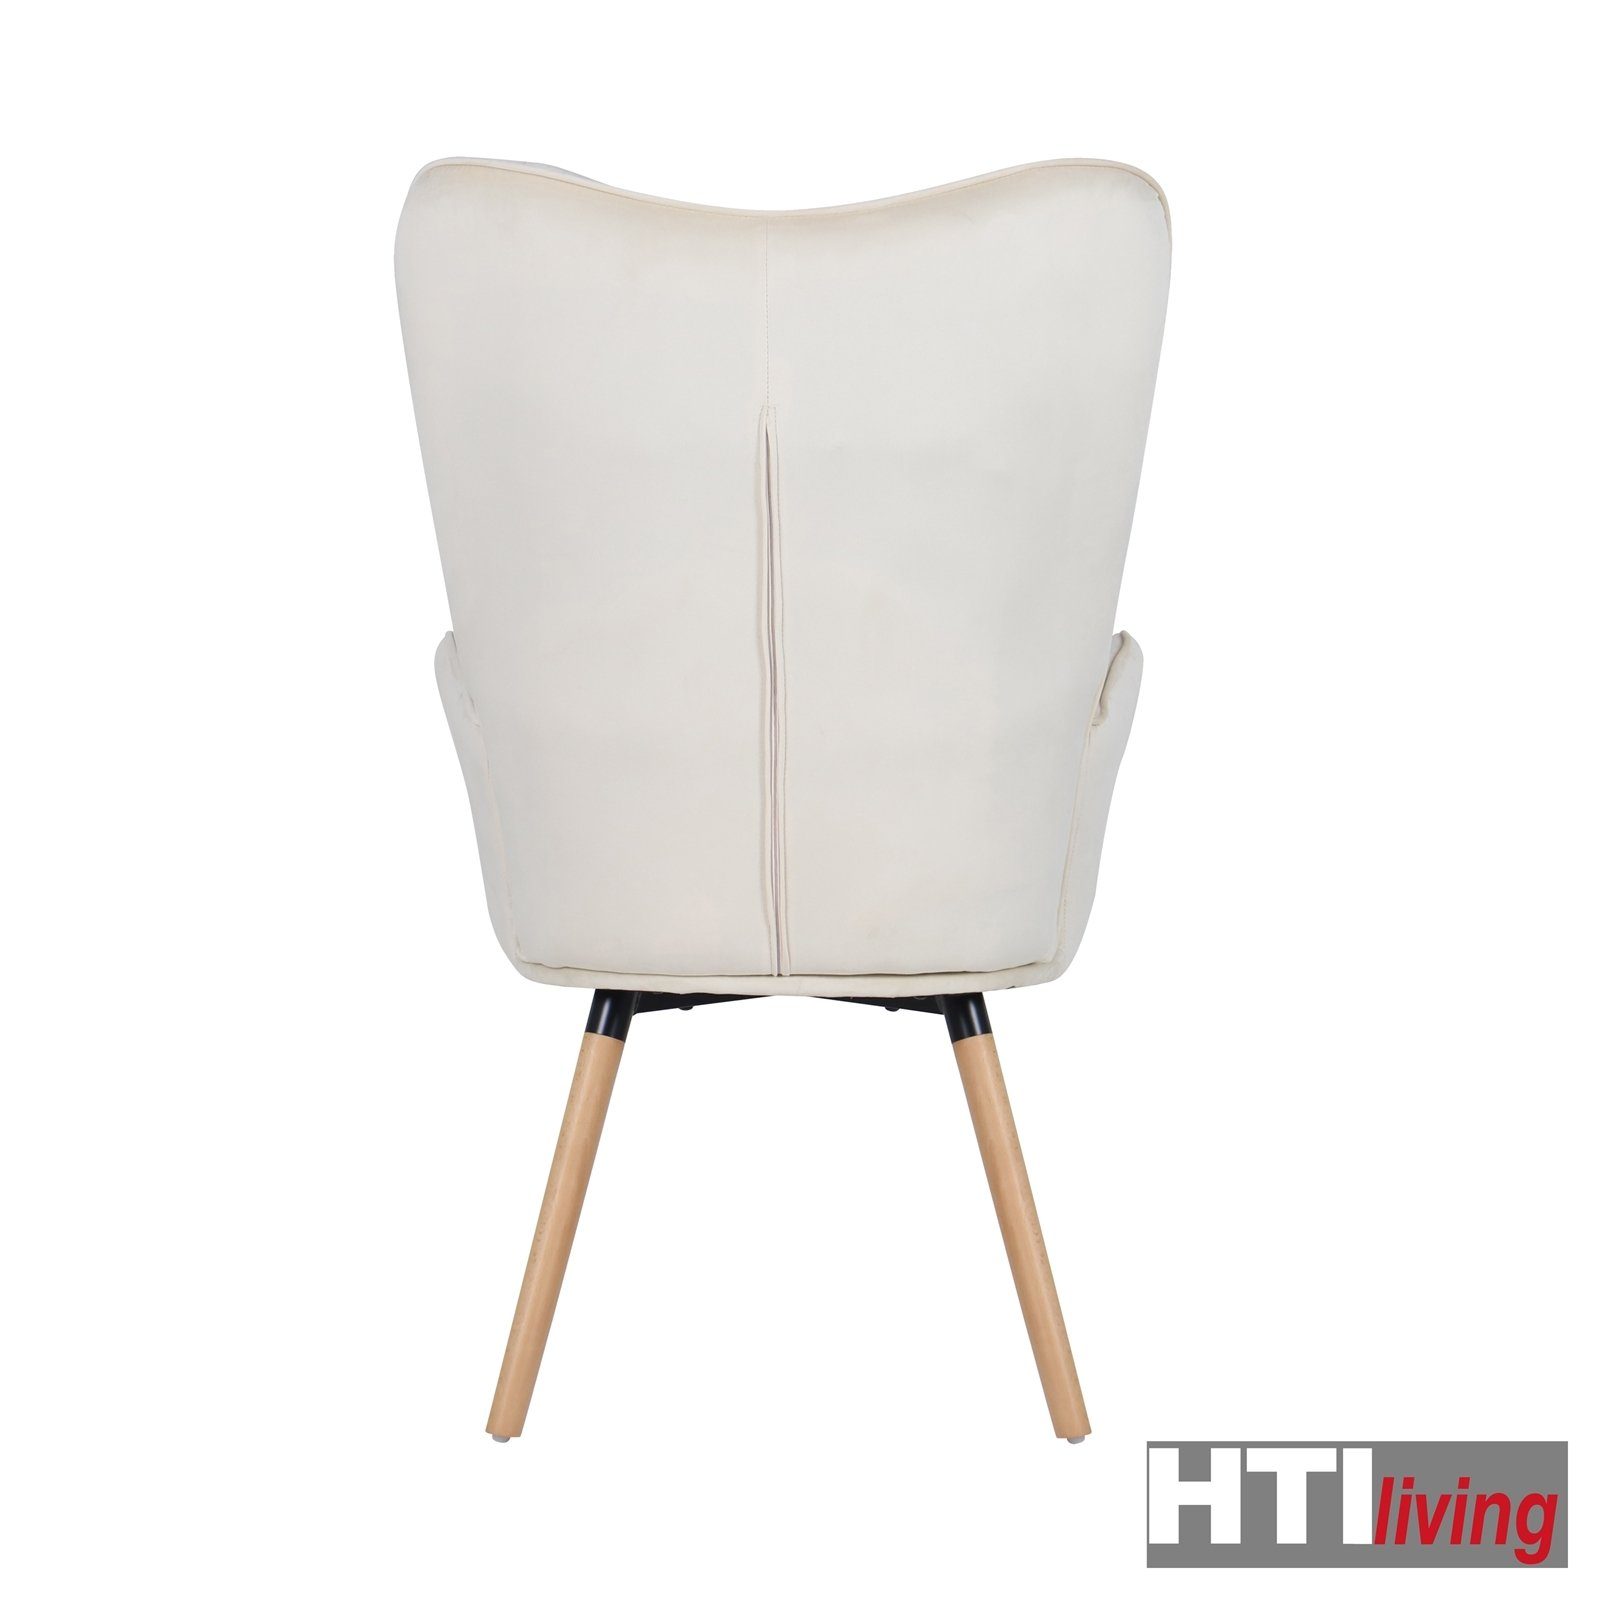 Beige | Loungesessel Beige HTI-Living Cassidy Loungesessel